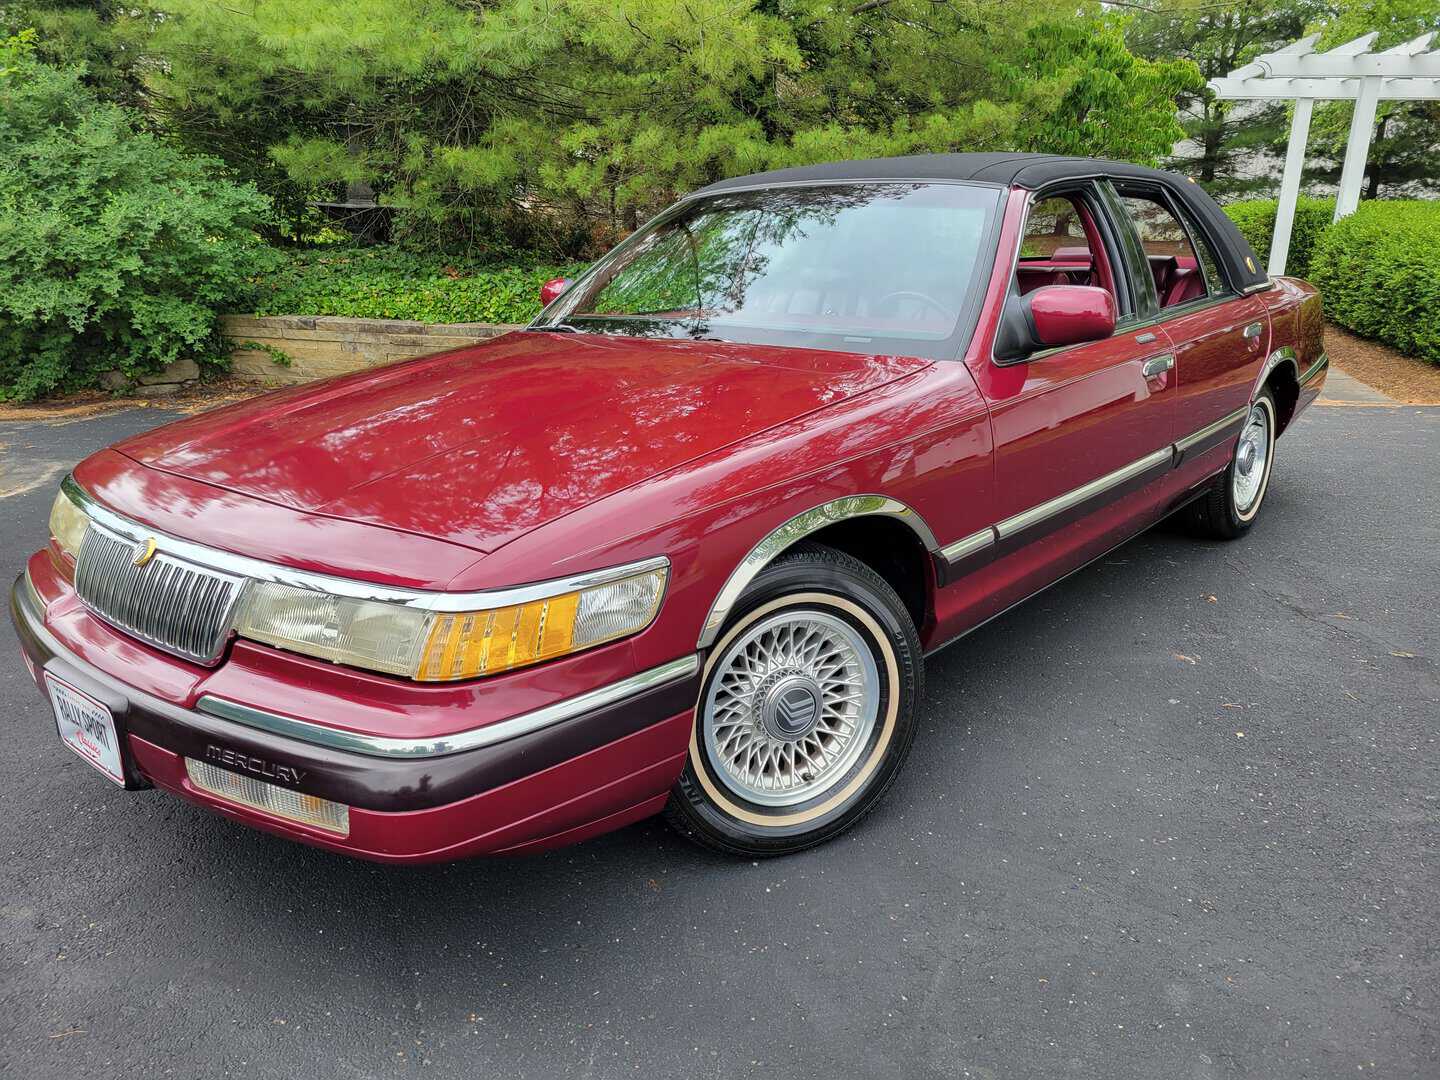 A maroon lincoln town car is parked in a parking lot.